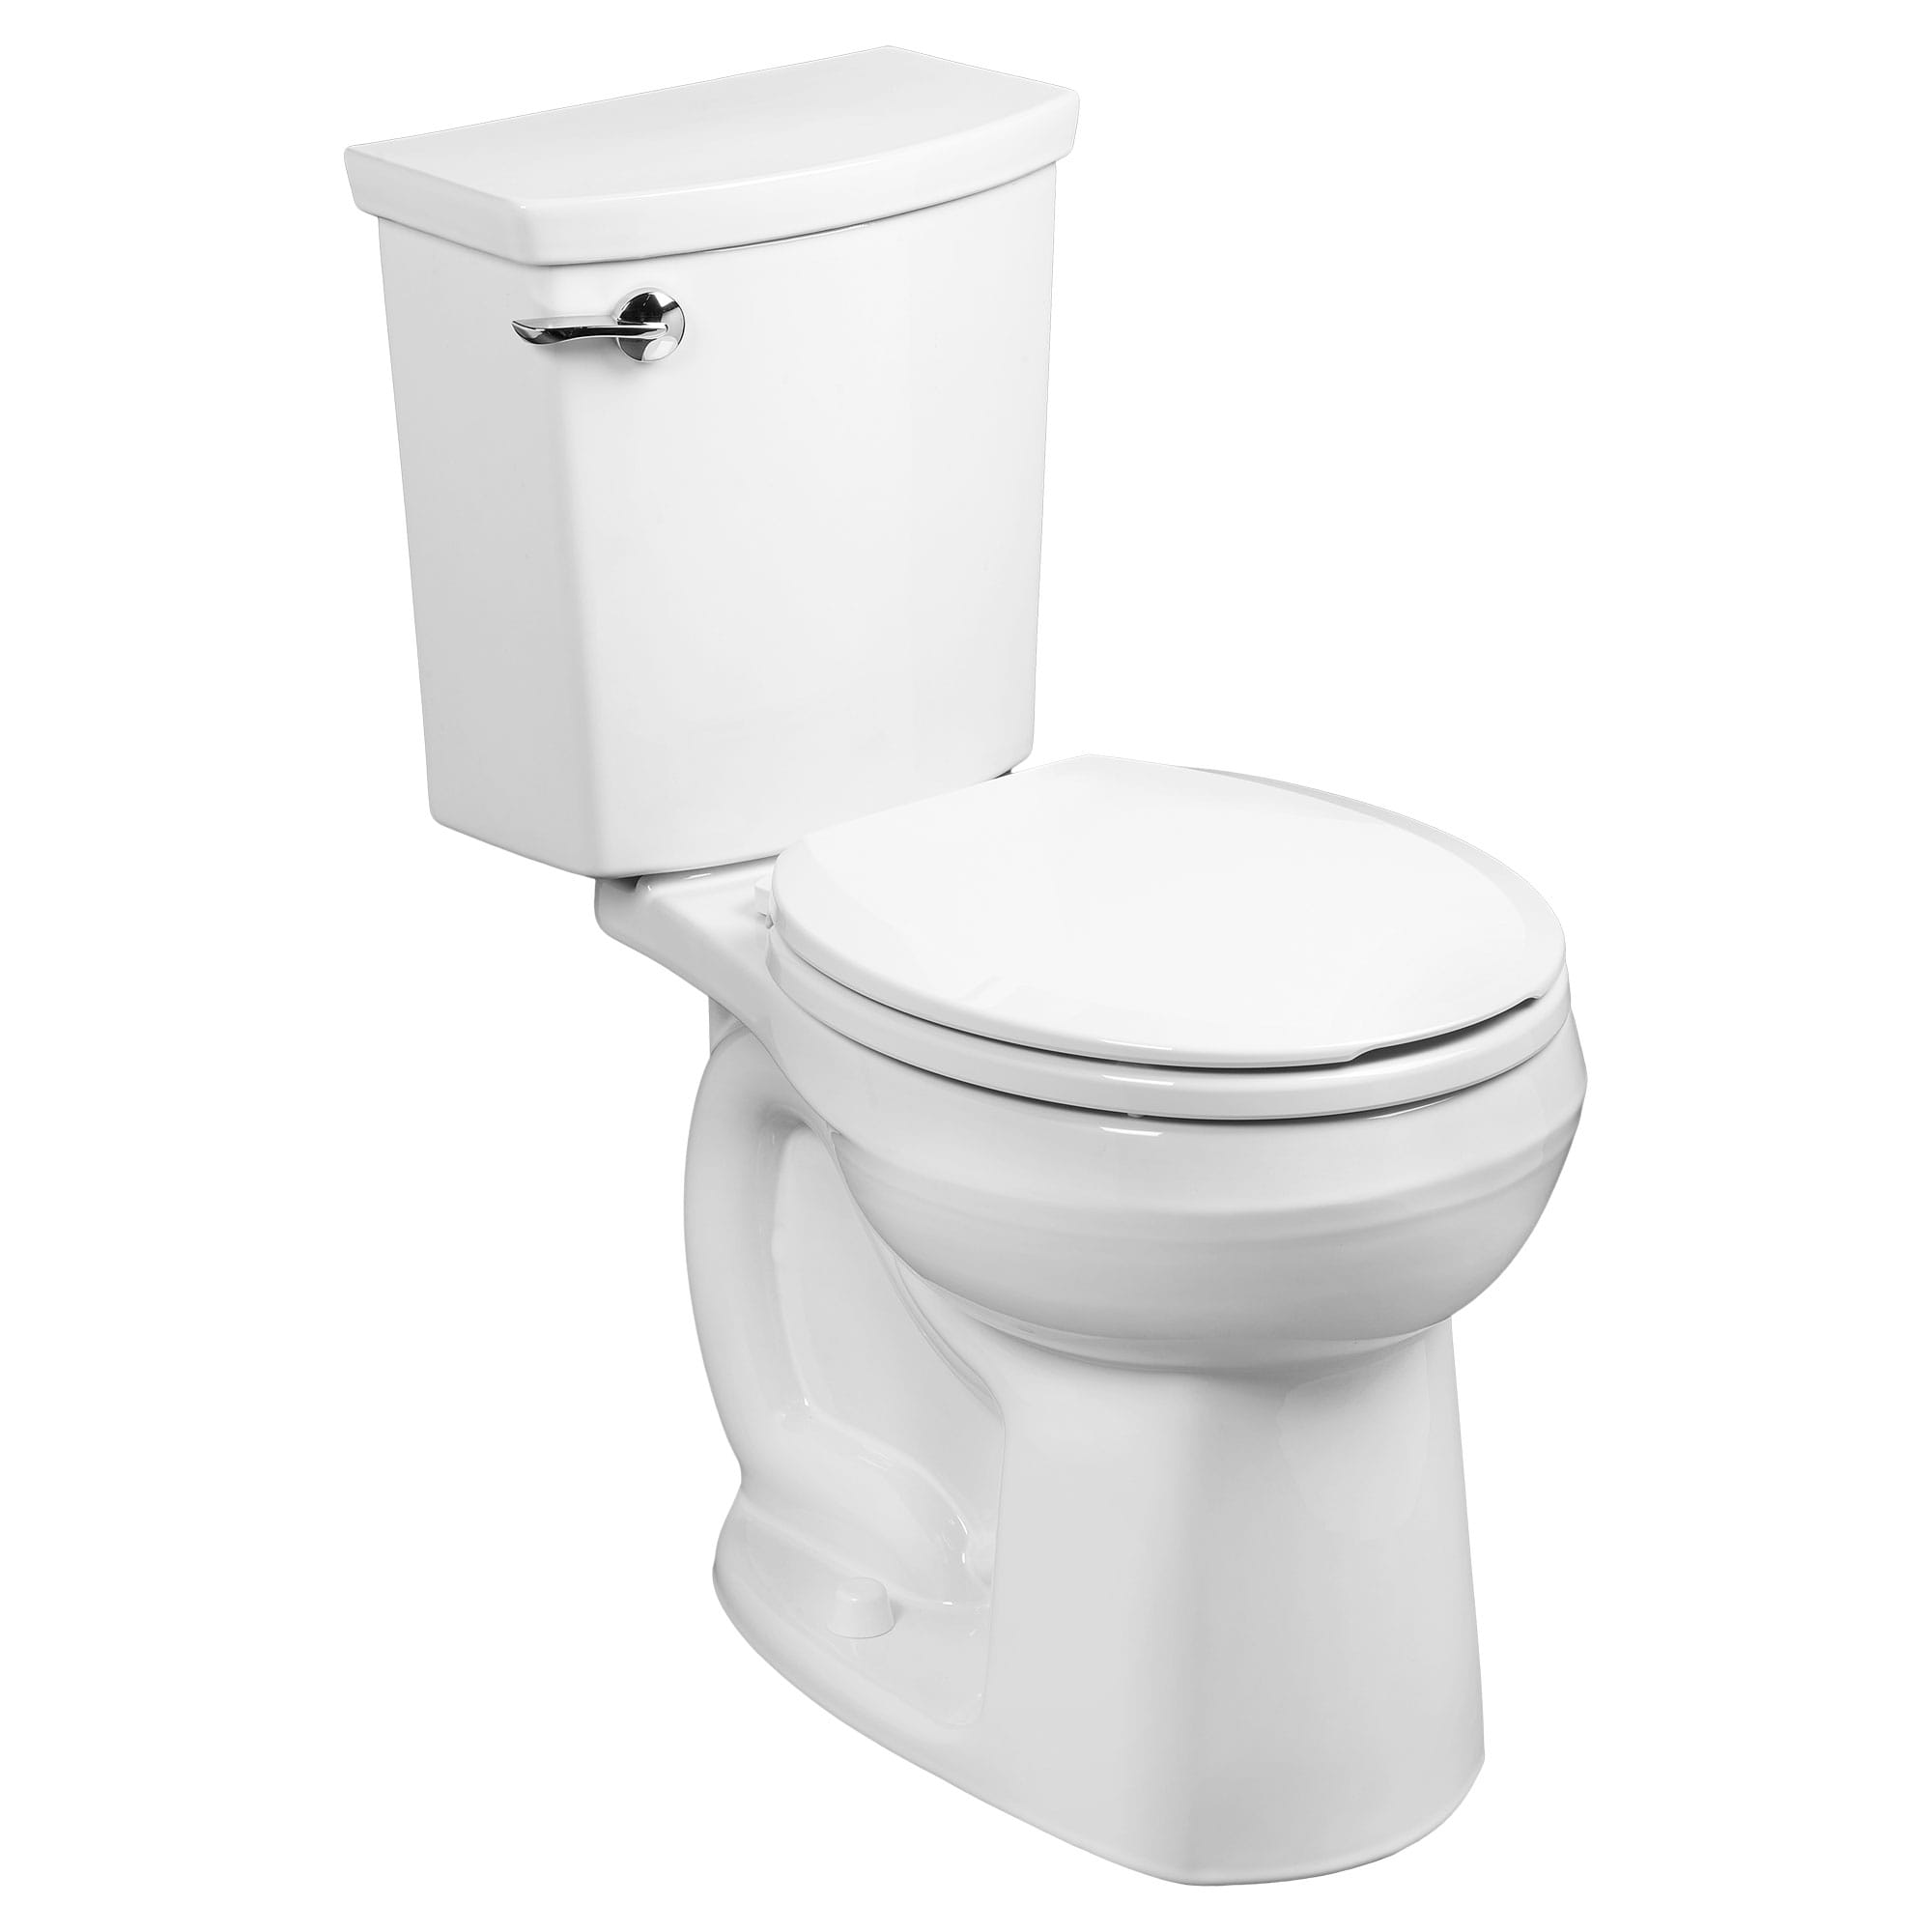 H2Optimum Two Piece 11 gpf 42 Lpf Standard Height Round Front Toilet Less Seat WHITE